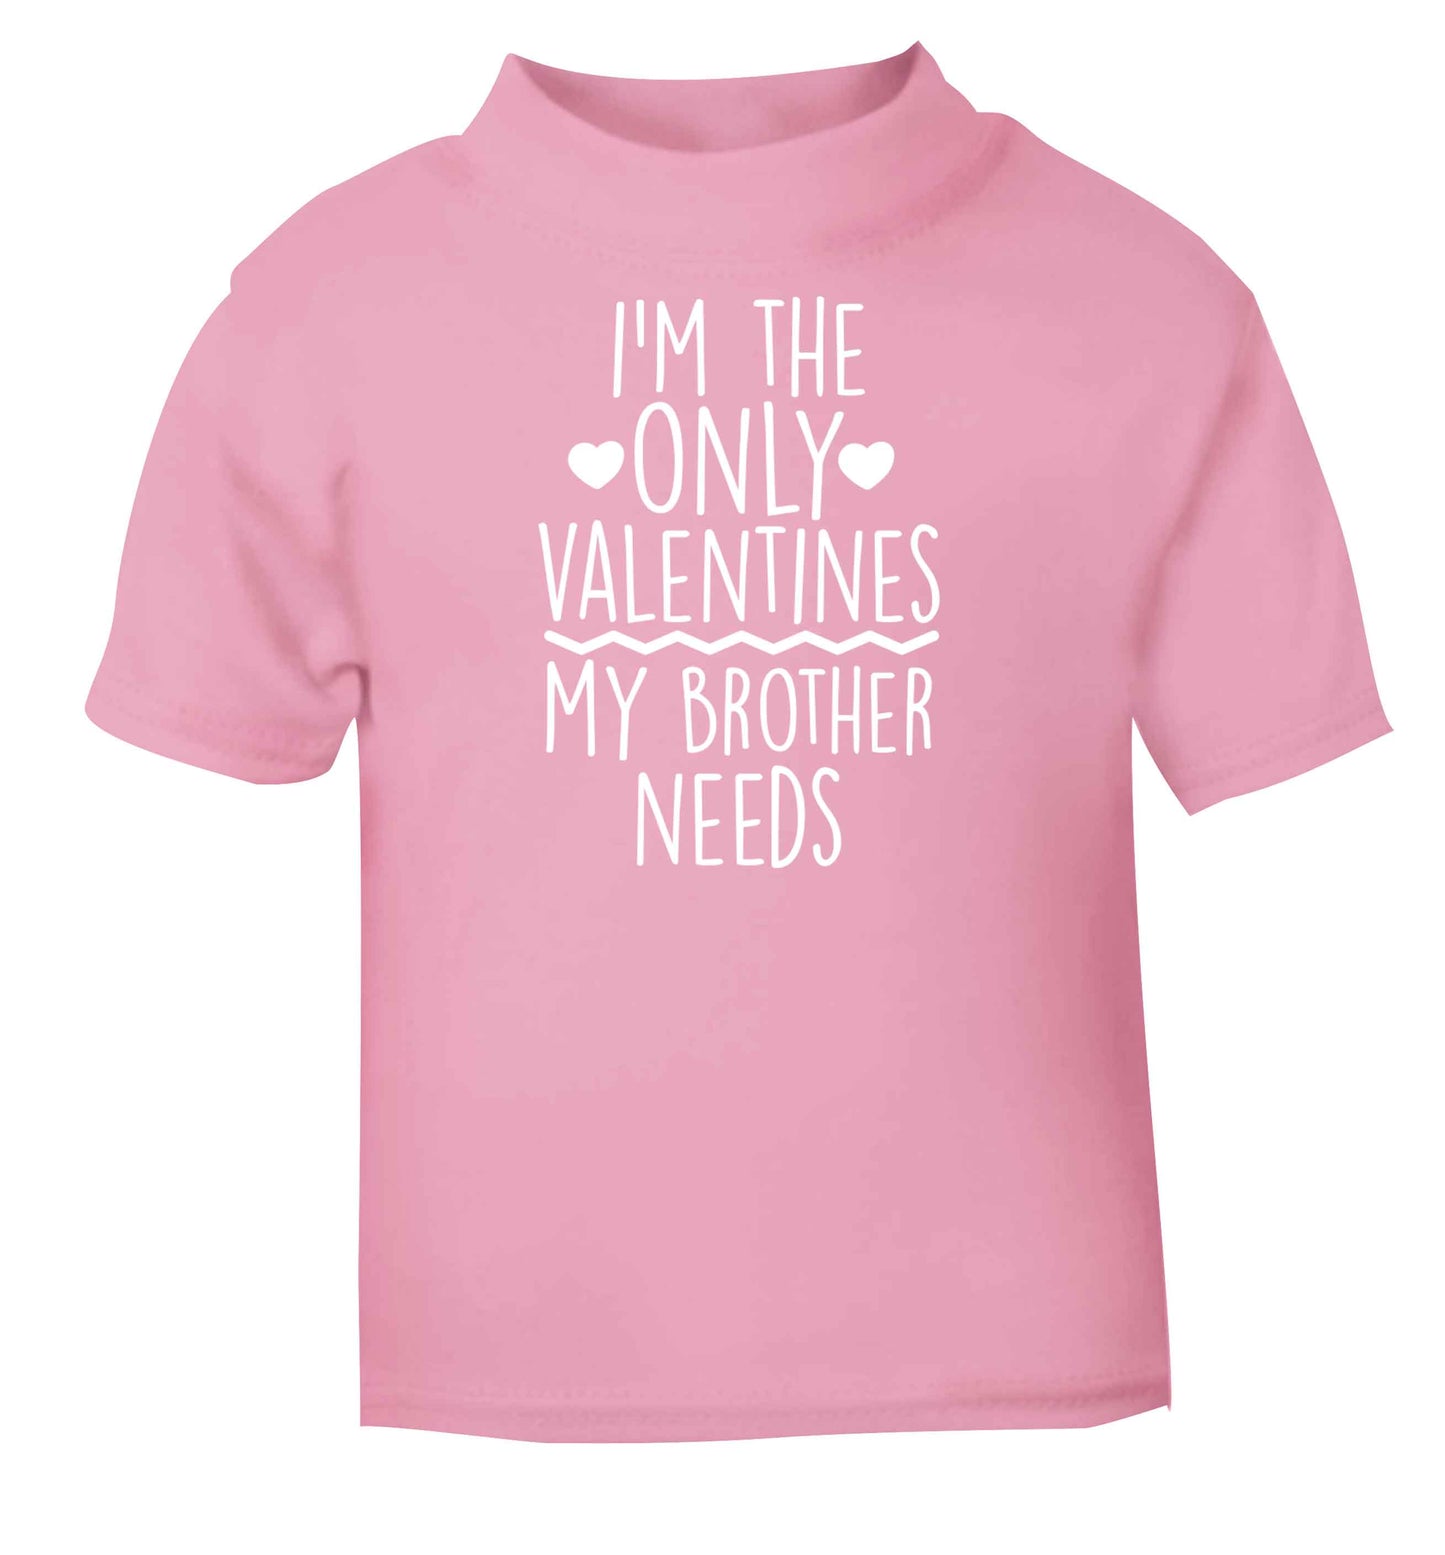 I'm the only valentines my brother needs light pink baby toddler Tshirt 2 Years